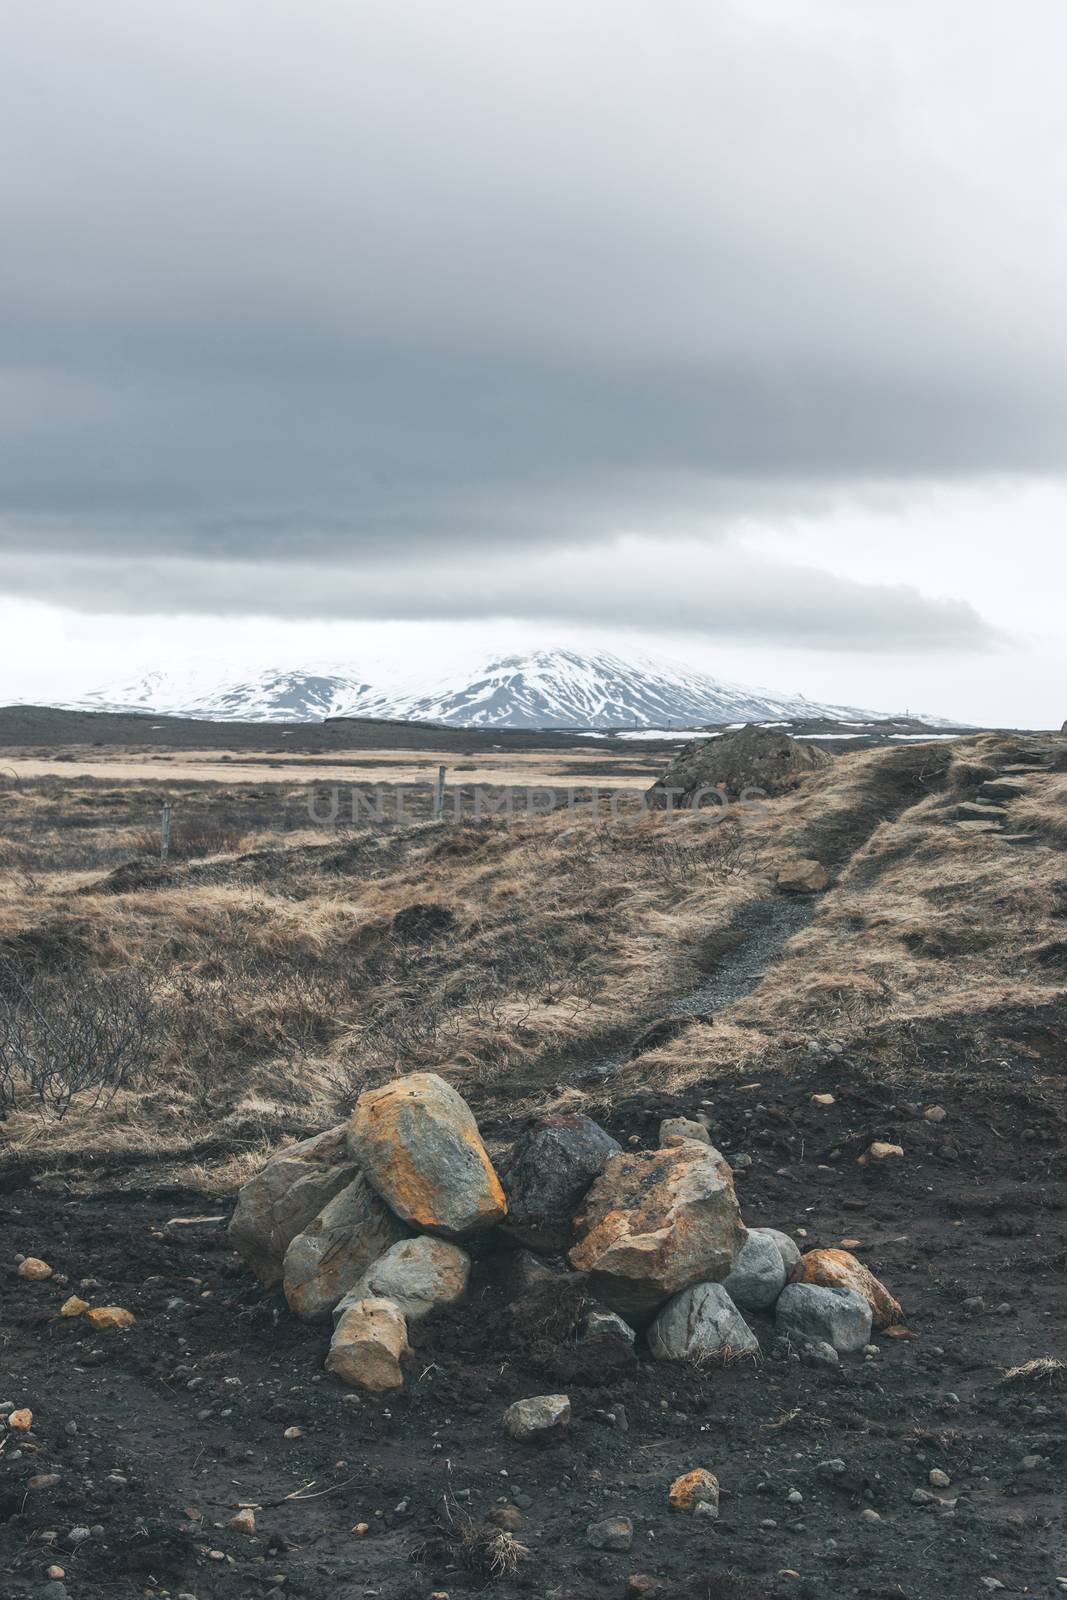 Cloudy weather over a rocky landscape by Sportactive